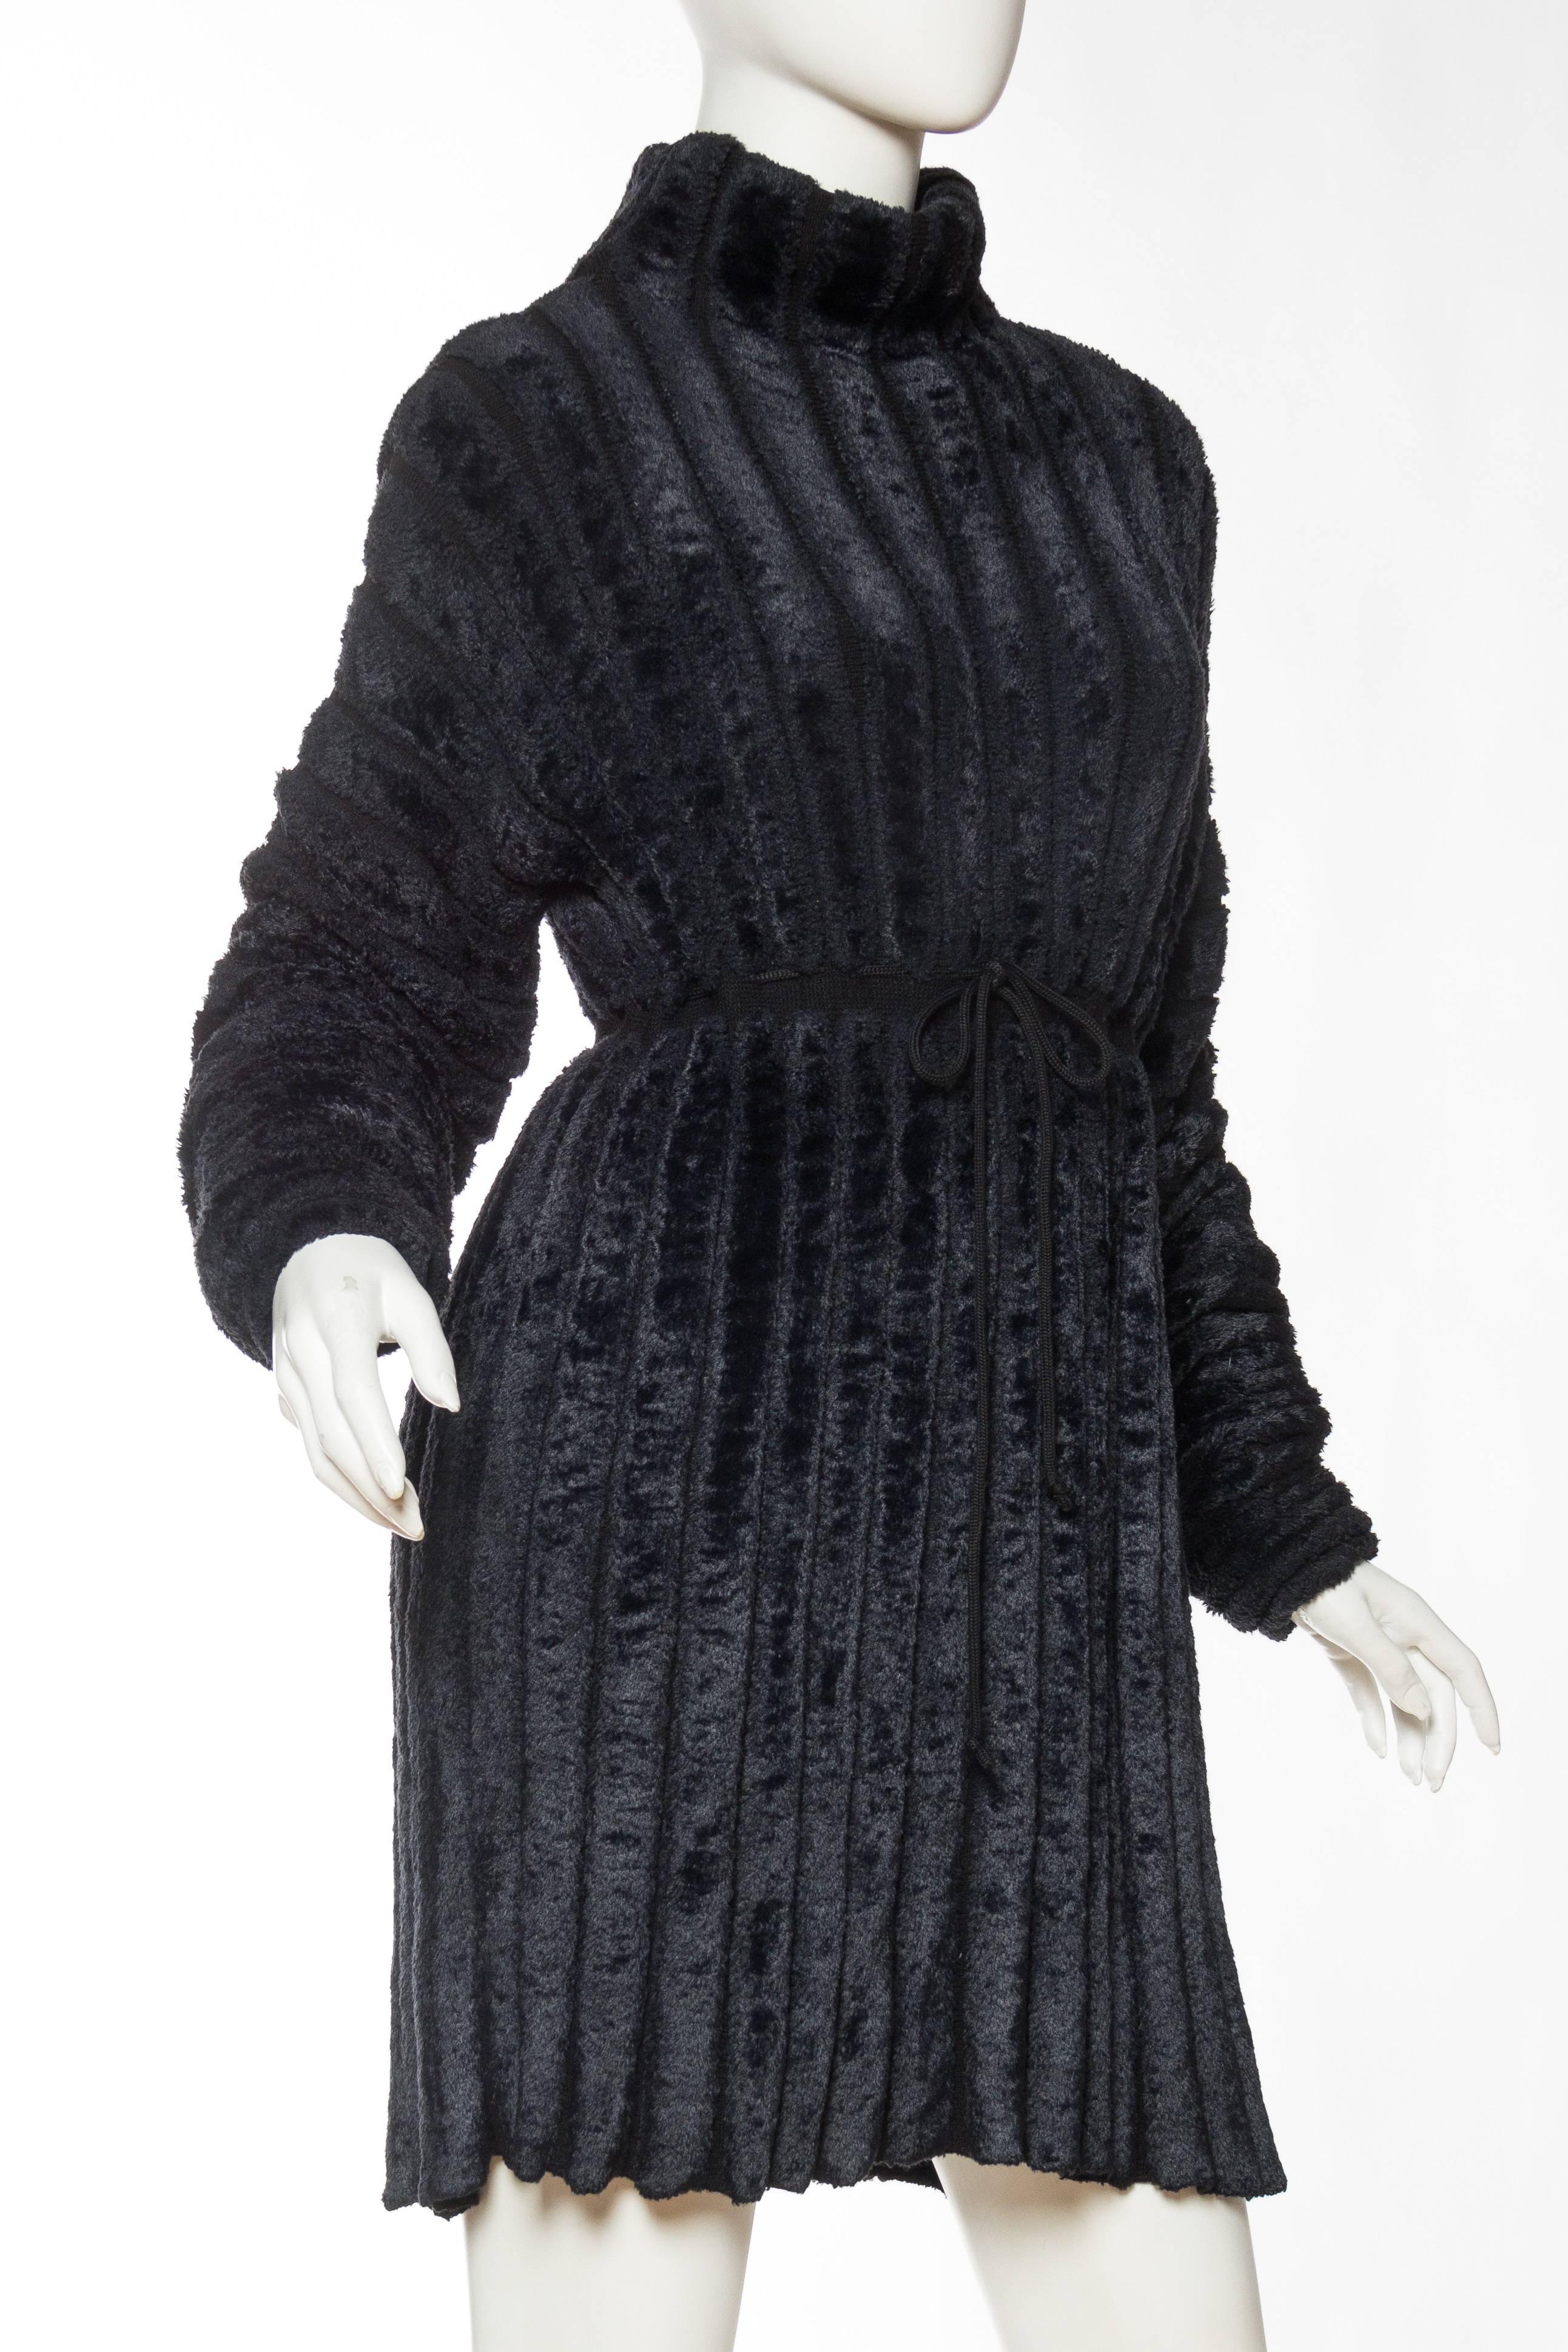 Women's Alaia Iconic Oversized Chenille Dress, Fall 1988 Collection